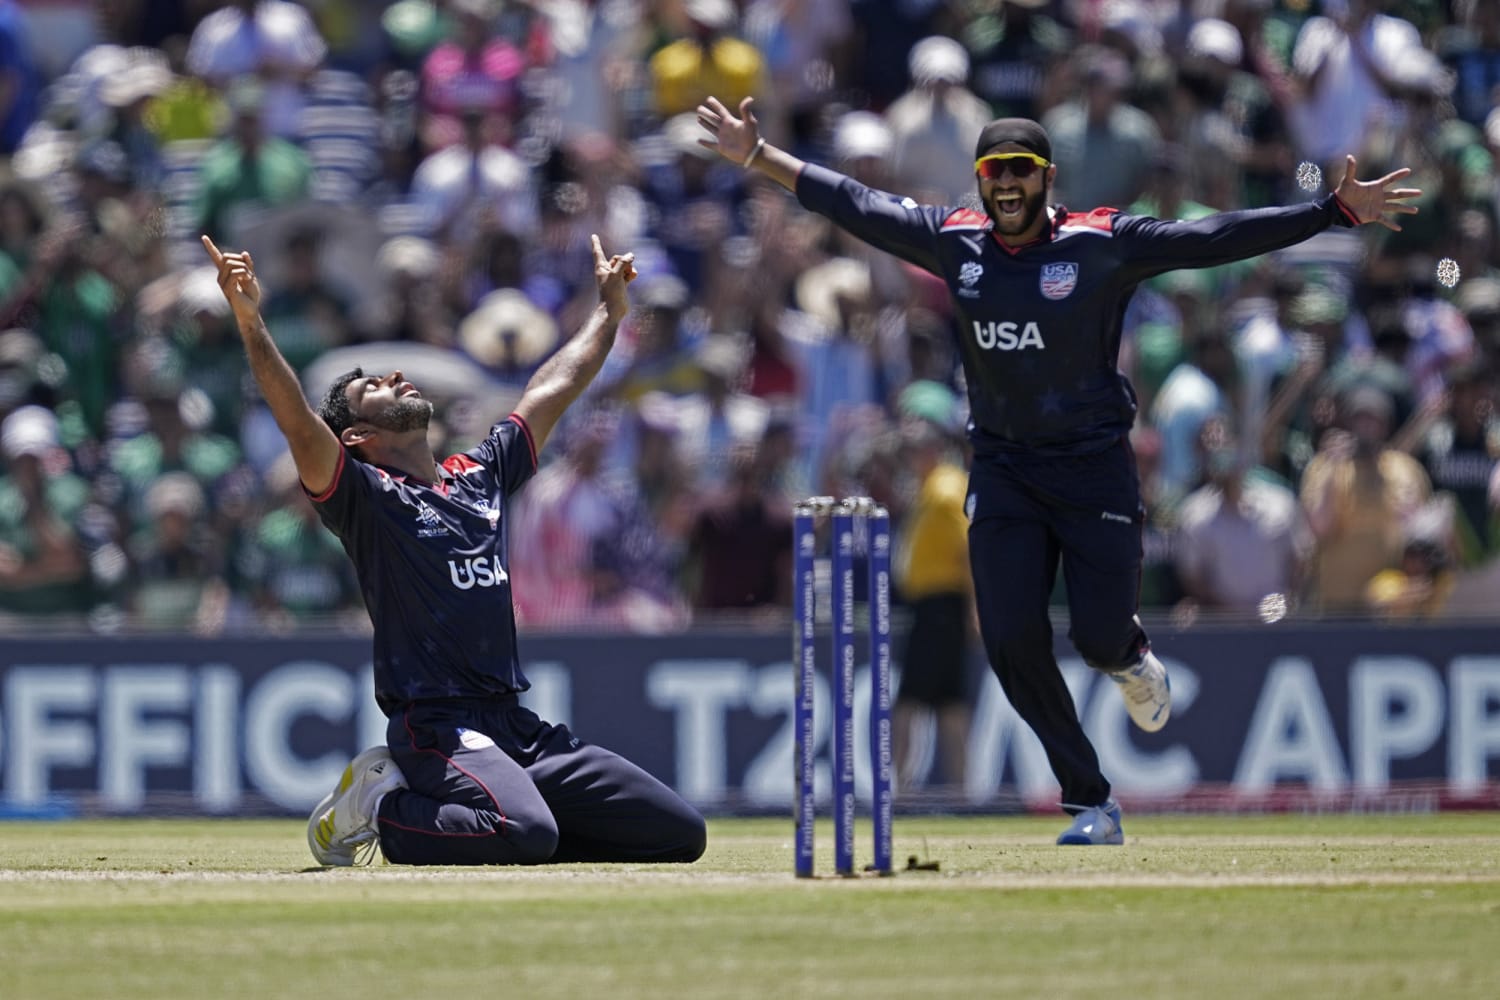 The United States national team achieves a historic victory over Pakistan in the World Cup